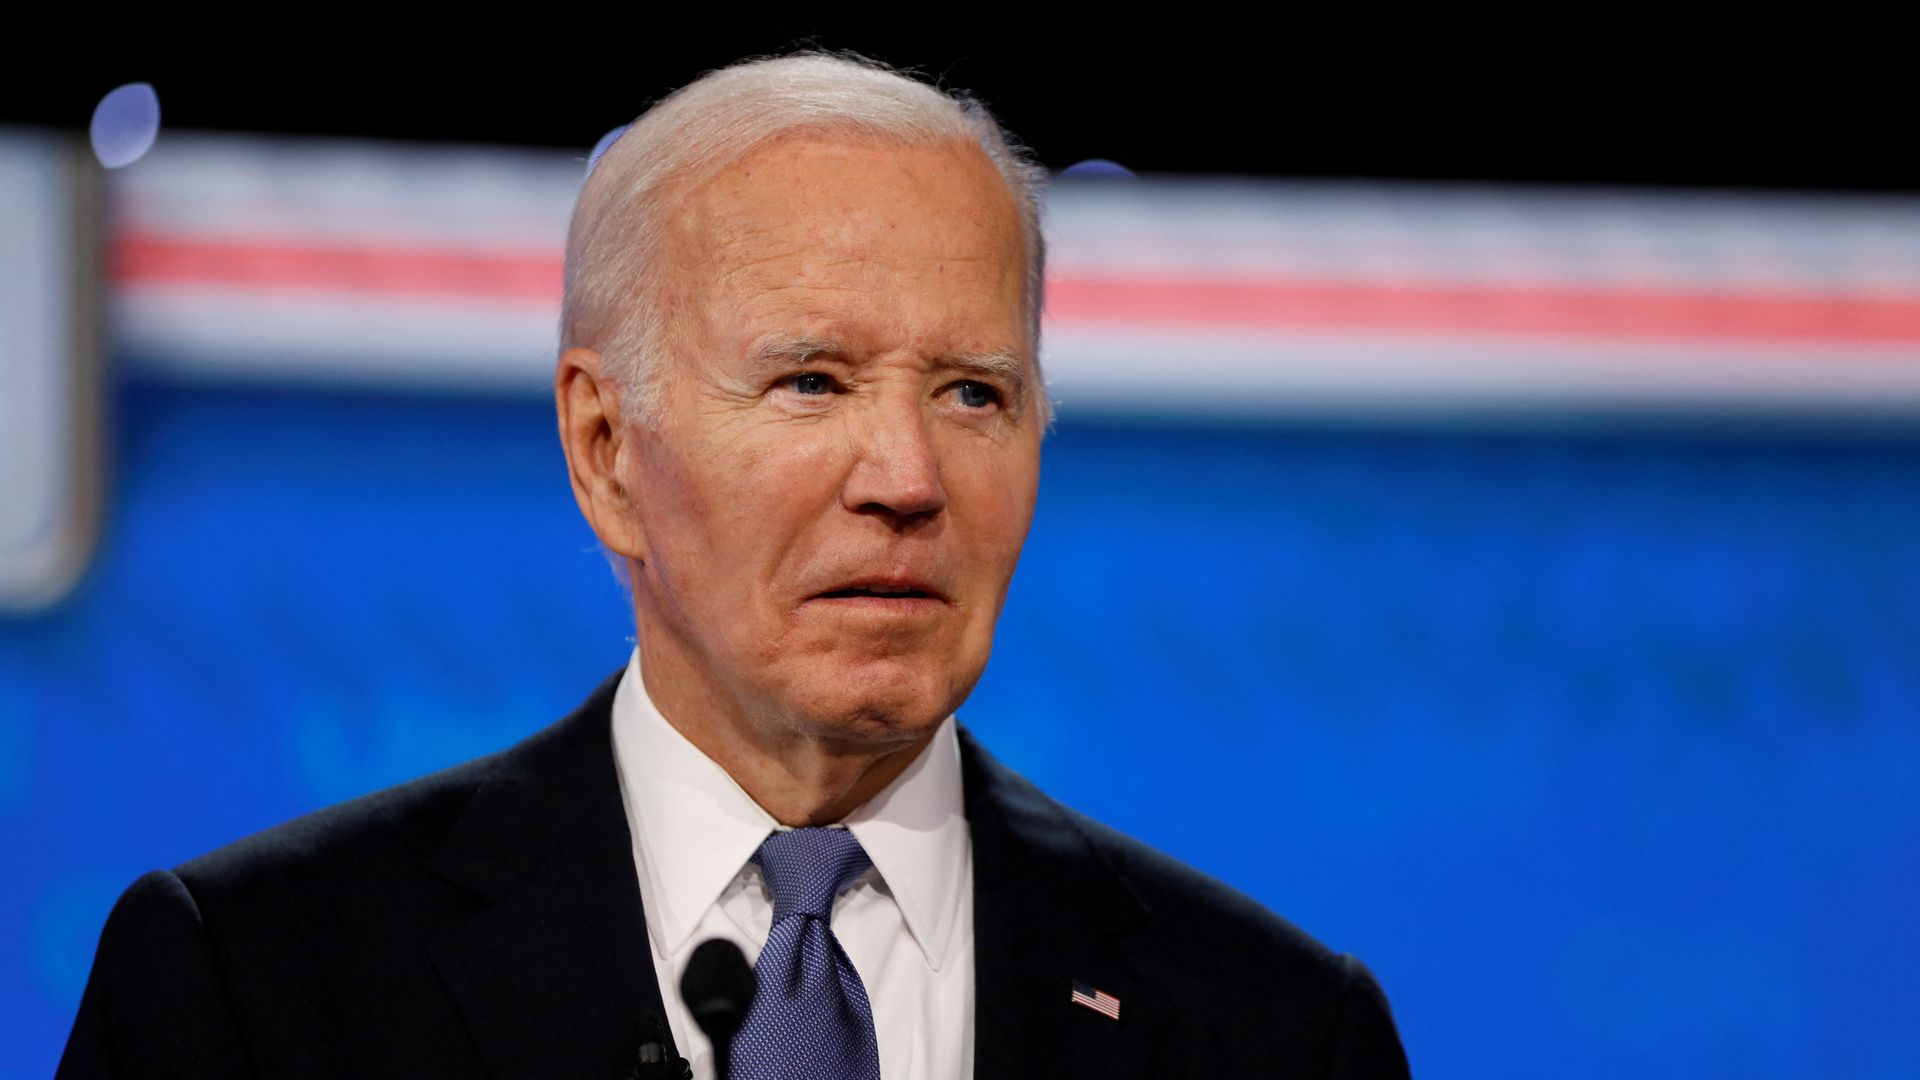 White House: Biden not being treated for Parkinson's